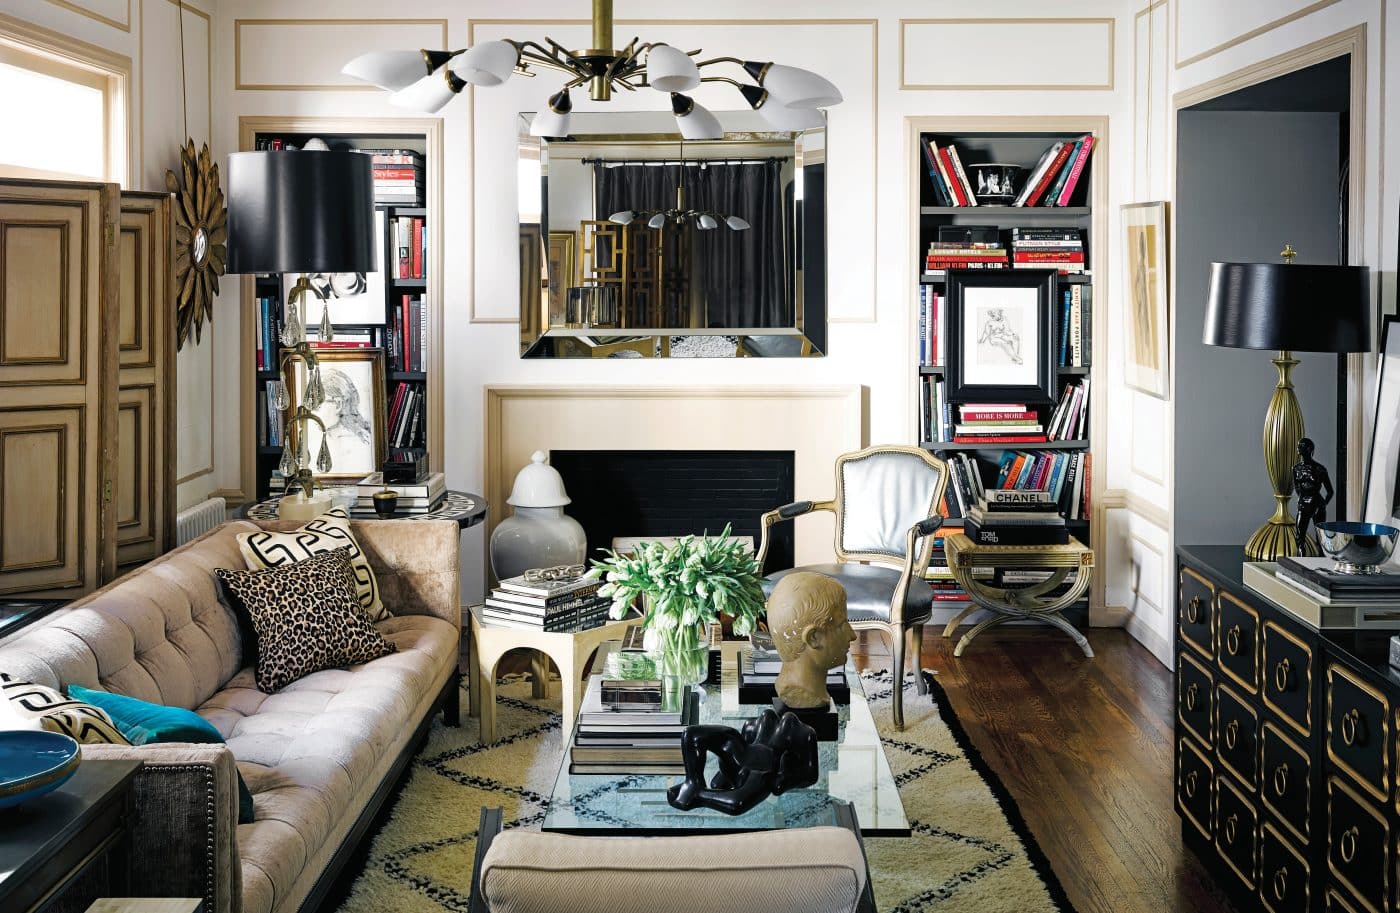 Interior designer David Jimenez living room of his former home on San Francisco's Nob Hill from his book Parisian By Design published by Rizzoli 